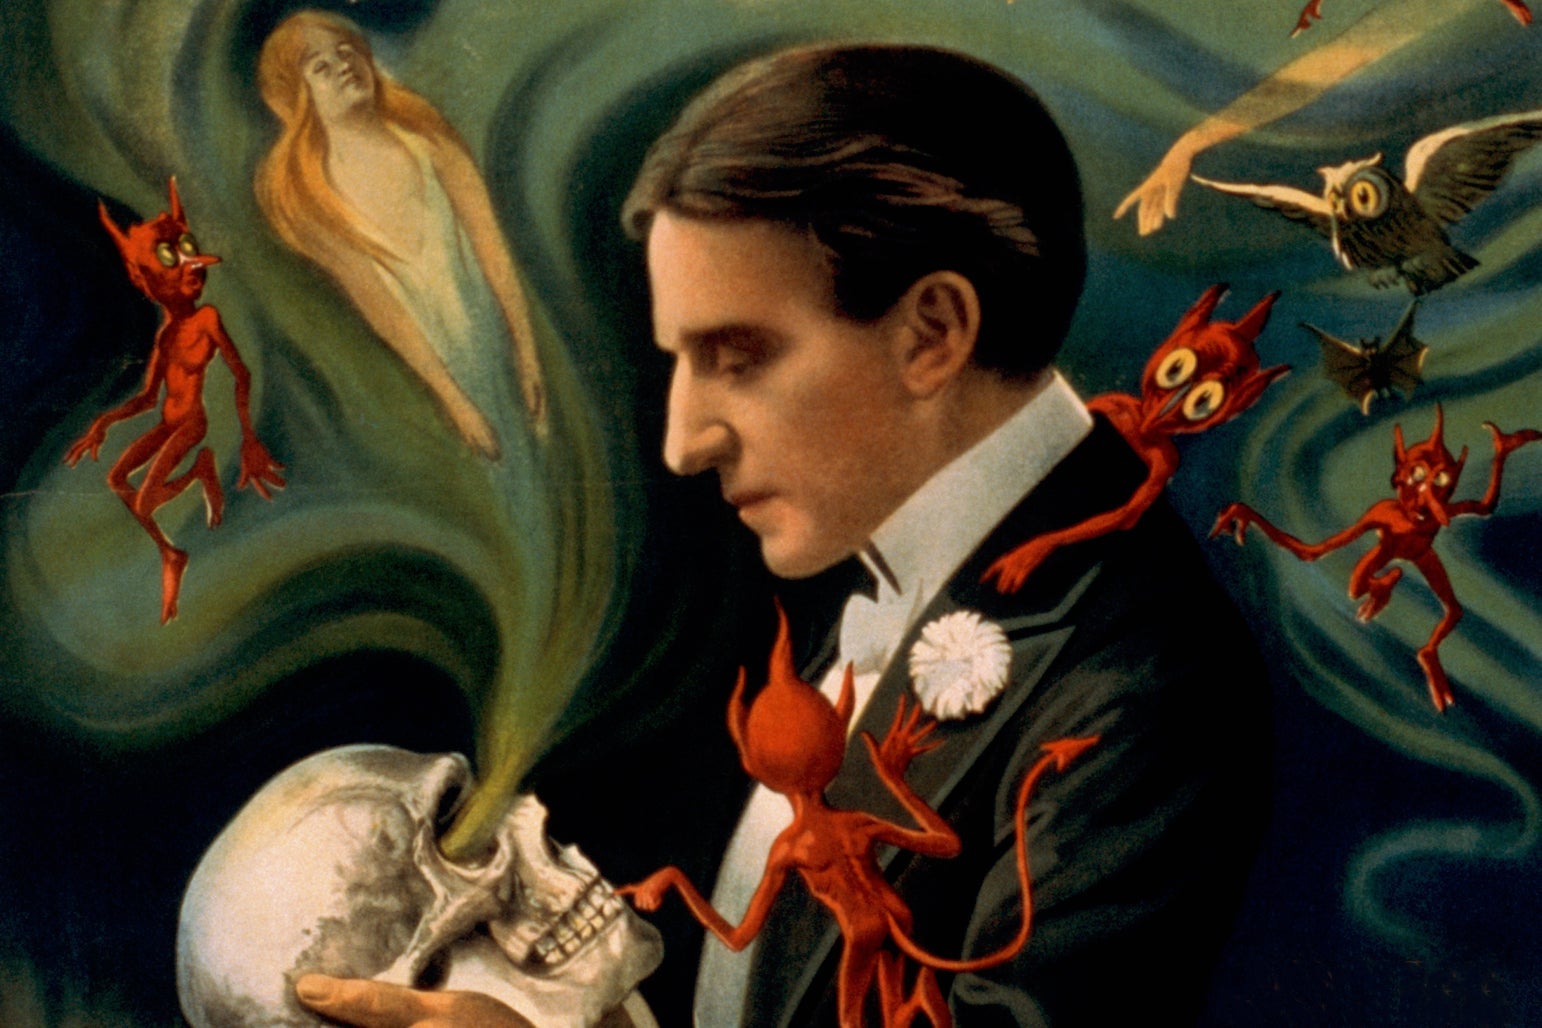 An illustration from a 1910s advertisement for a magician, staring into a skull he is holding, as ghosts fly from the eye sockets.